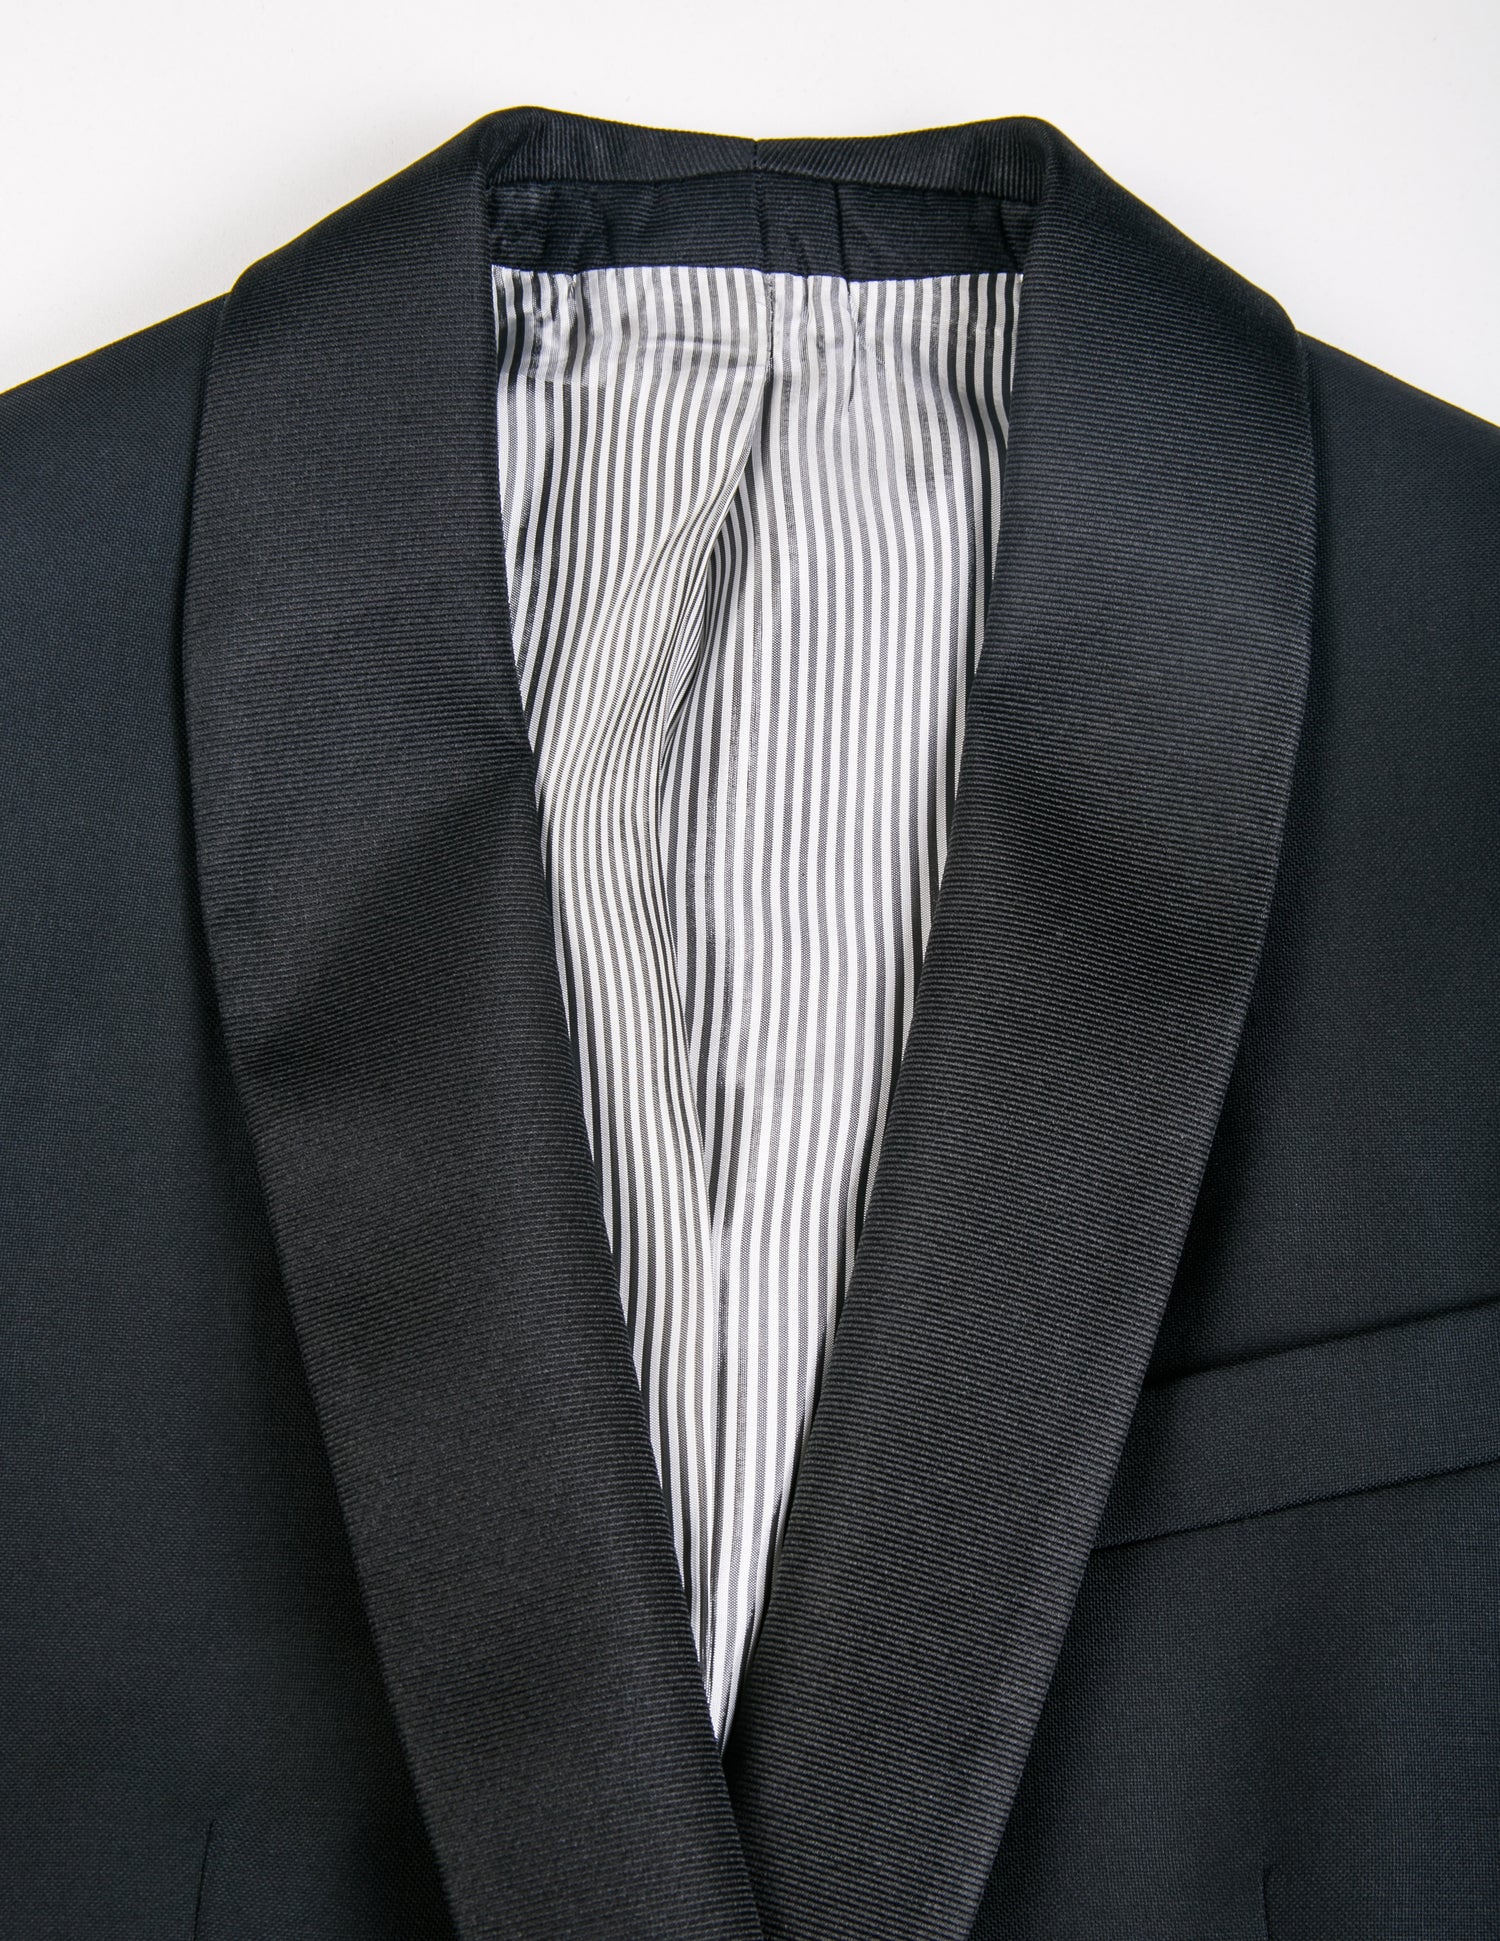 Detail shot of Brooklyn Tailors BKT50 Shawl Collar Tuxedo Jacket in Super 110s - Black with Grosgrain Lapel showing grosgrain lapel, pocket, and lining